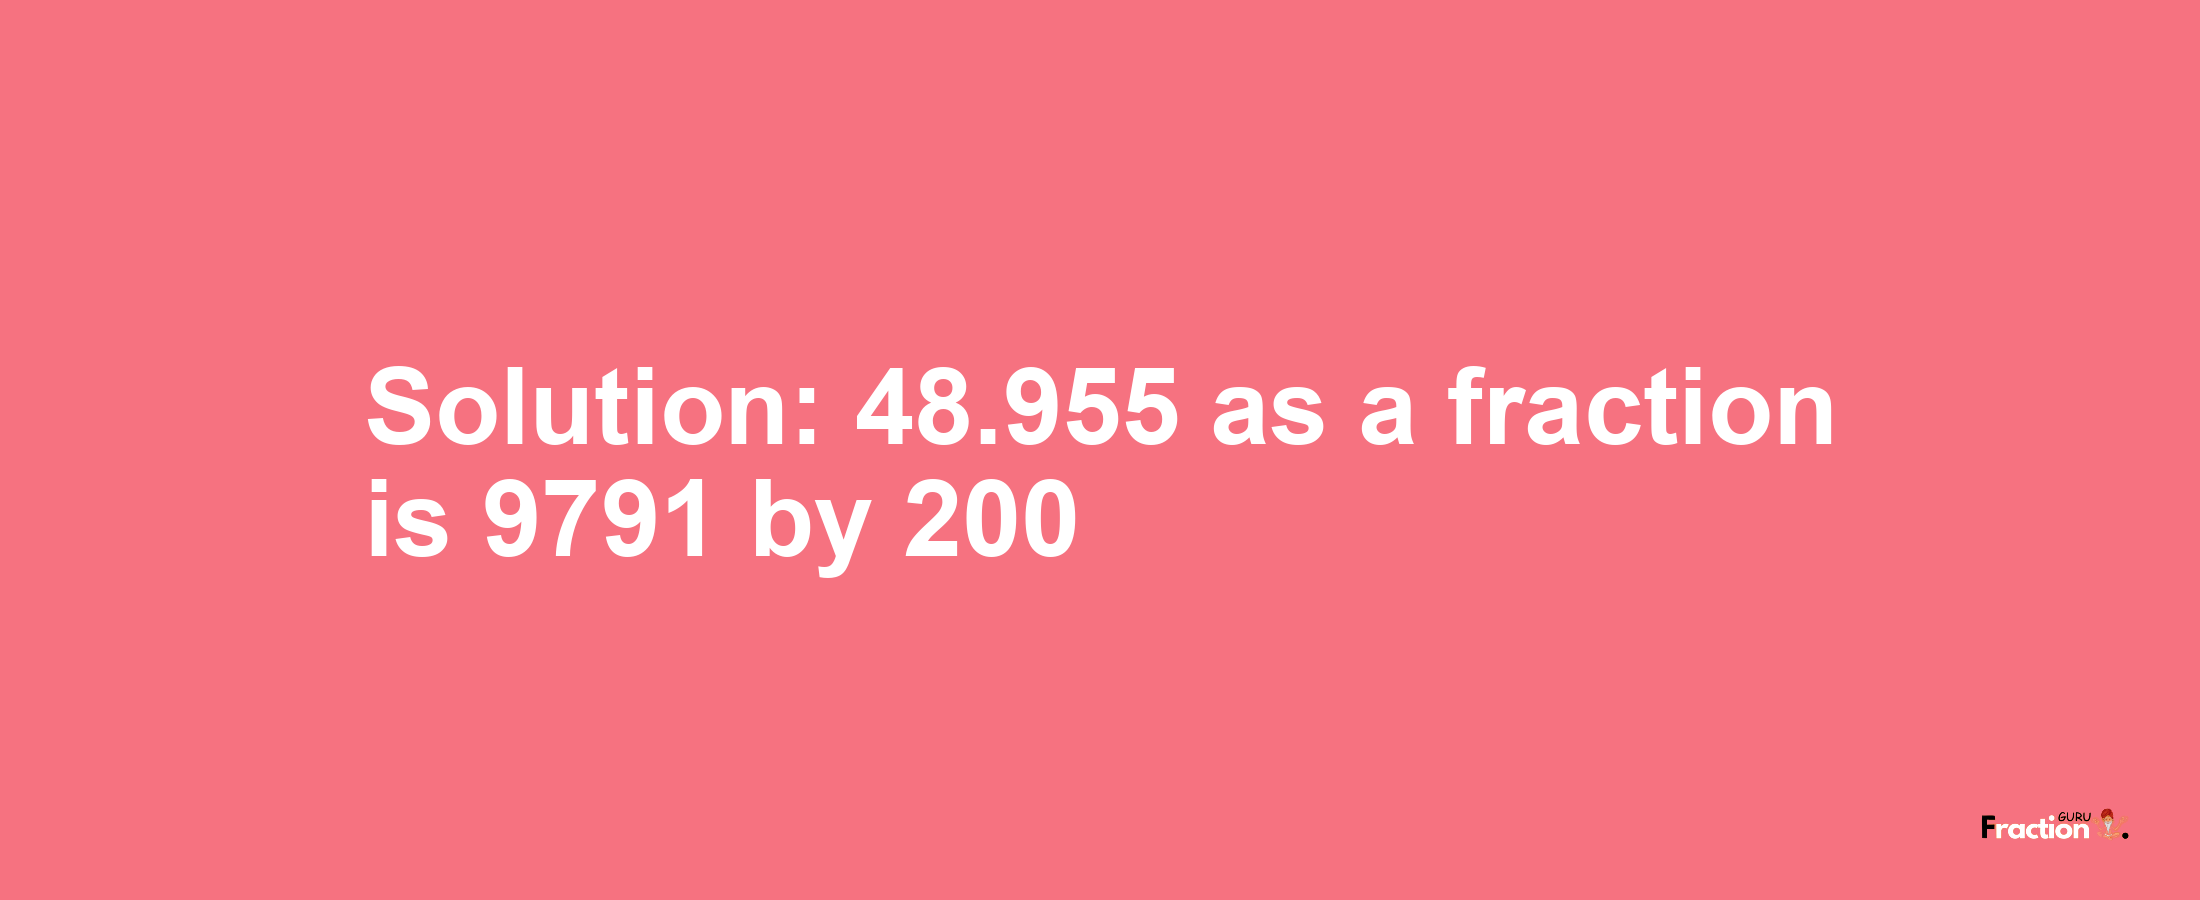 Solution:48.955 as a fraction is 9791/200